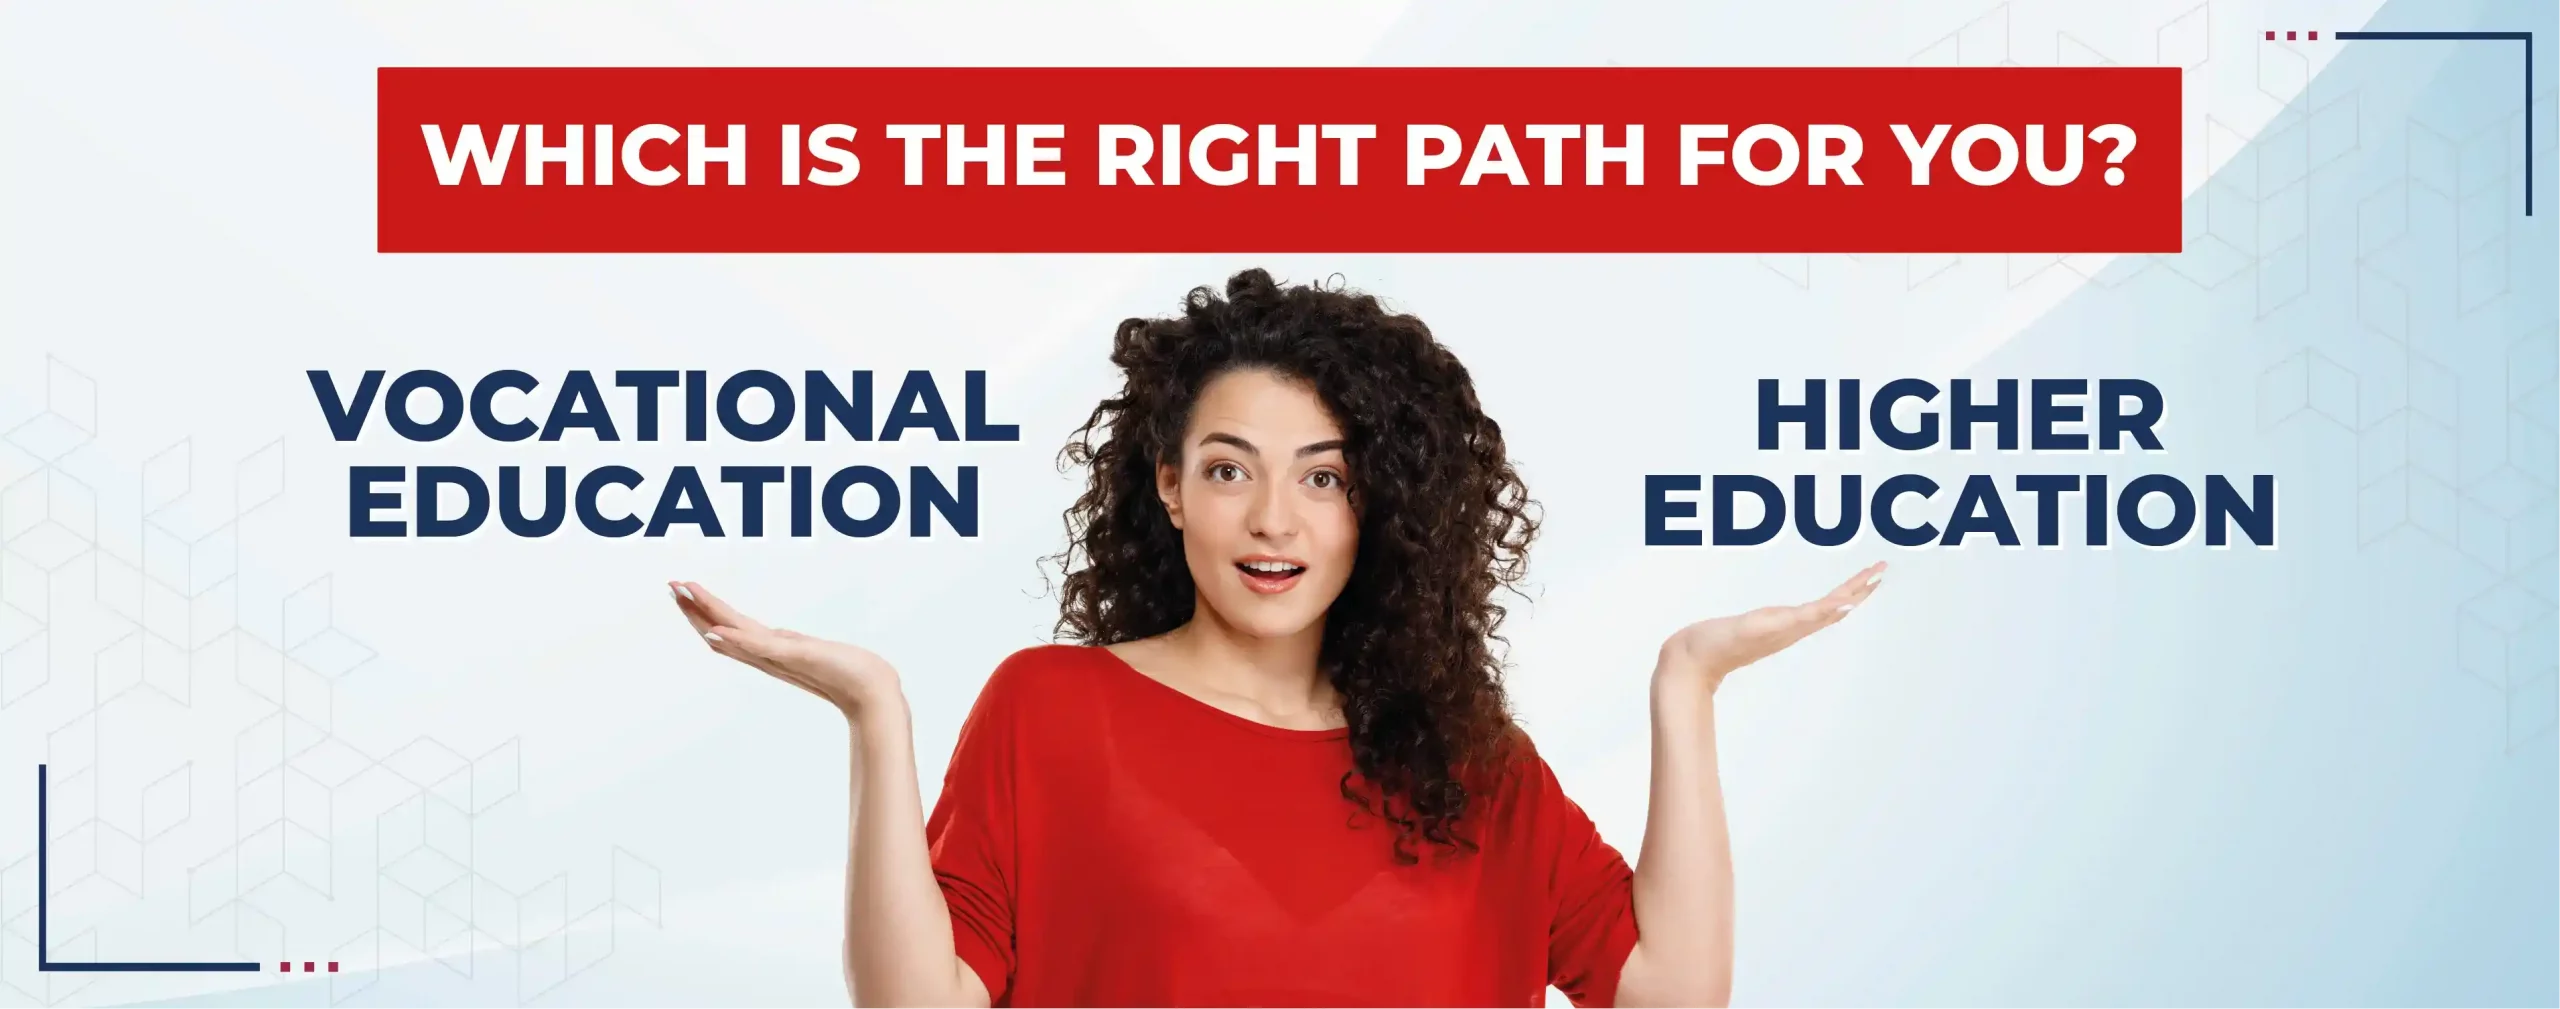 Vocational Education vs Higher Education: Which Is the Right Path for You?